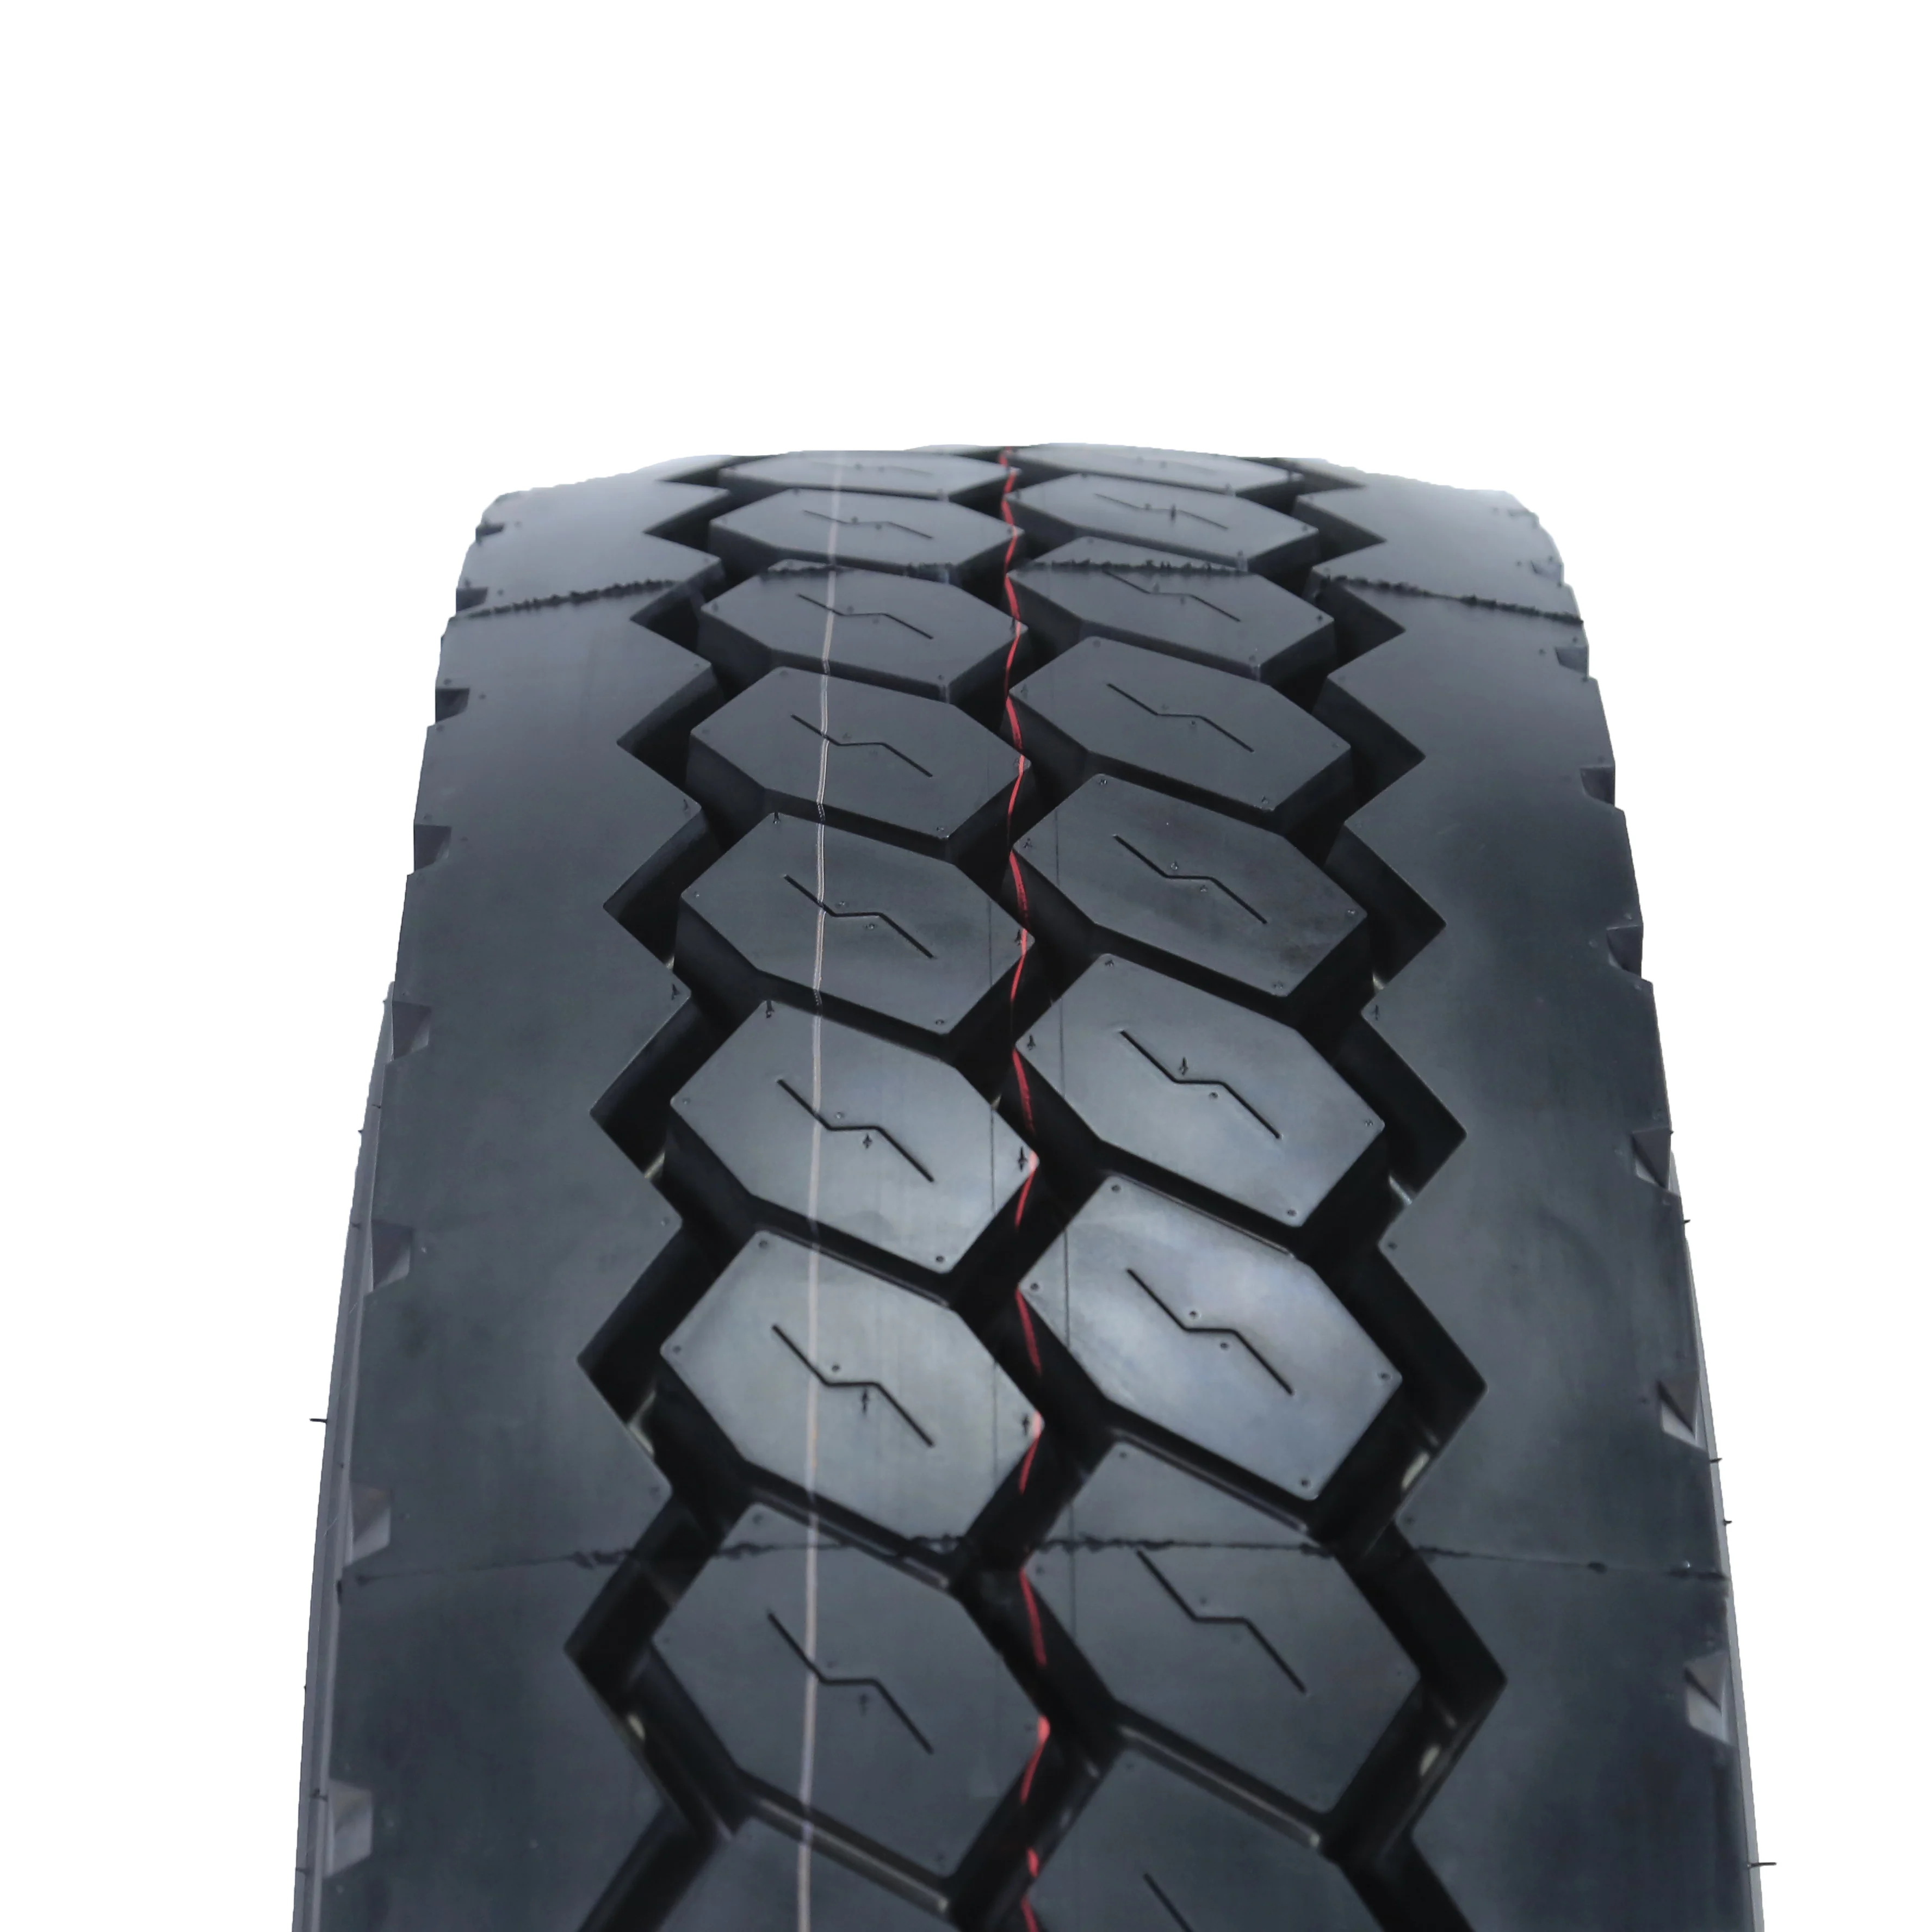 

JOYALL Radial Truck BUS Tires in CHINA For Drive Position 275/70R22.5 TBR A501